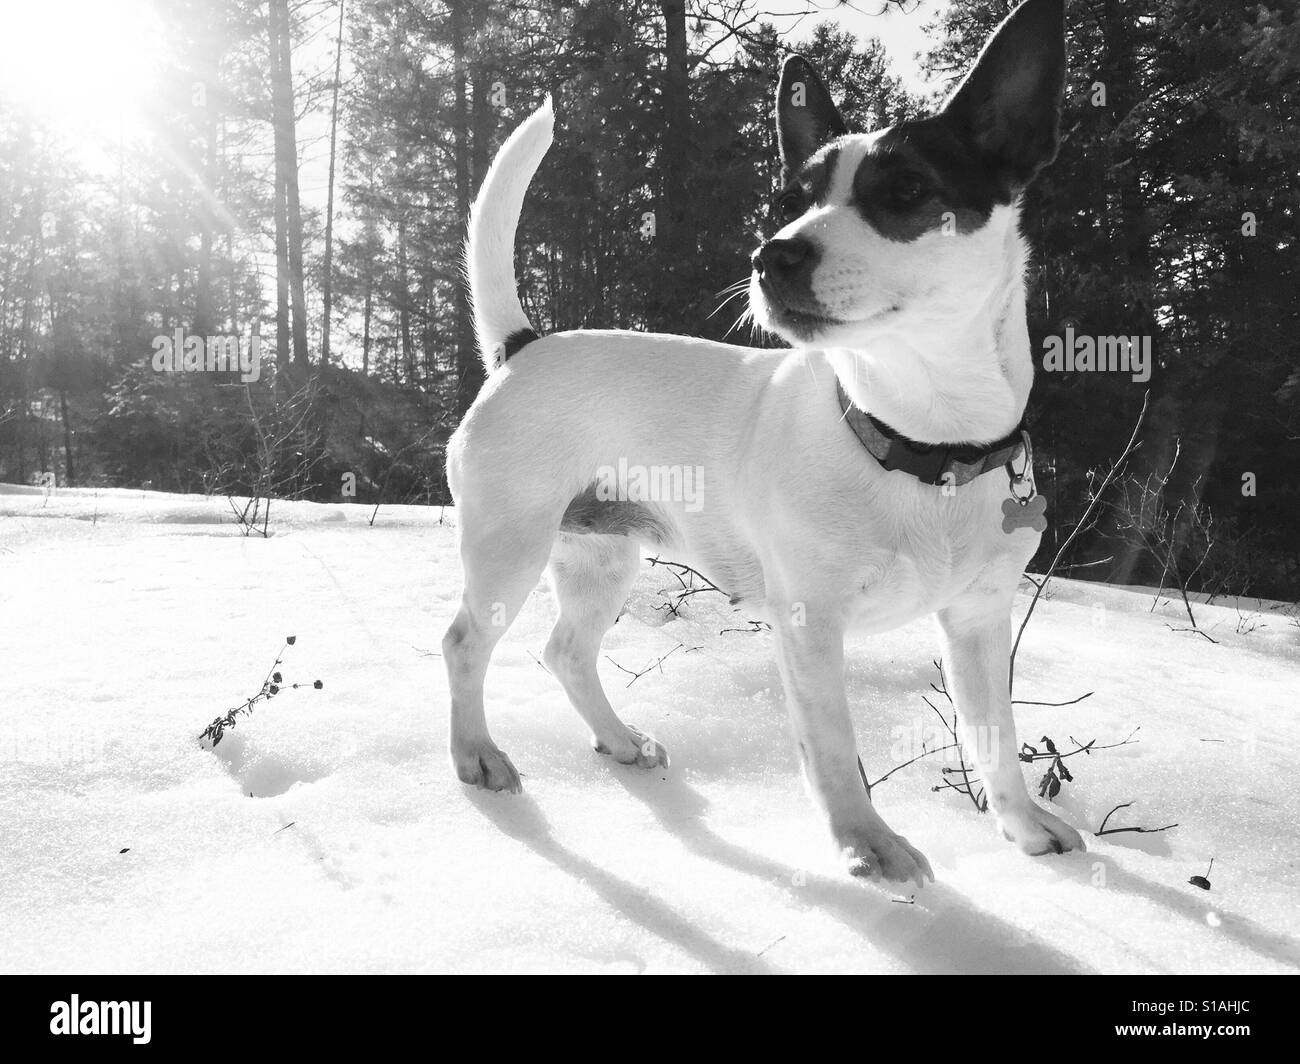 Dog standing in snow on a bright winter sunny day. In black and white. Stock Photo